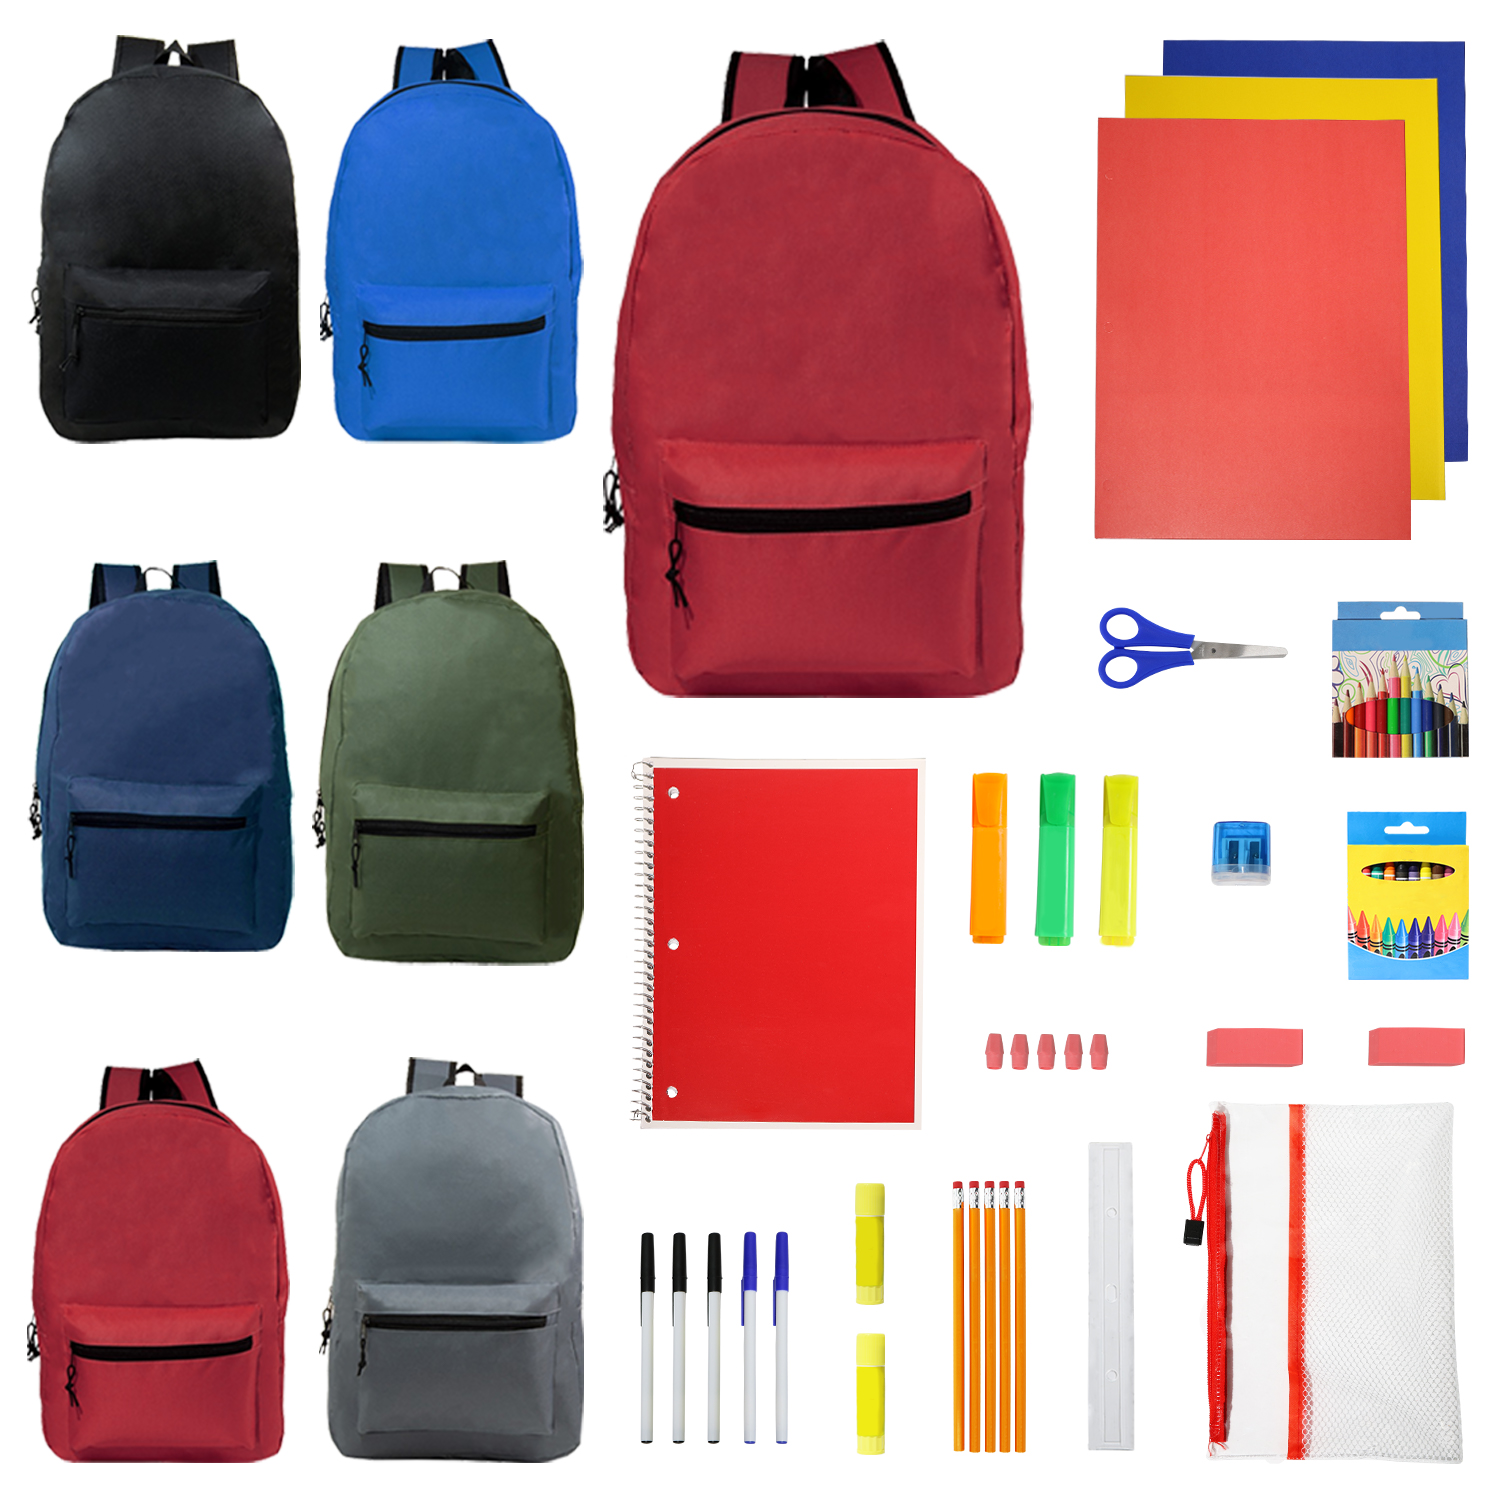 ''17'''' Classic BACKPACKs & 50 PC. Middle School Supply Bundle - Assorted Colors''